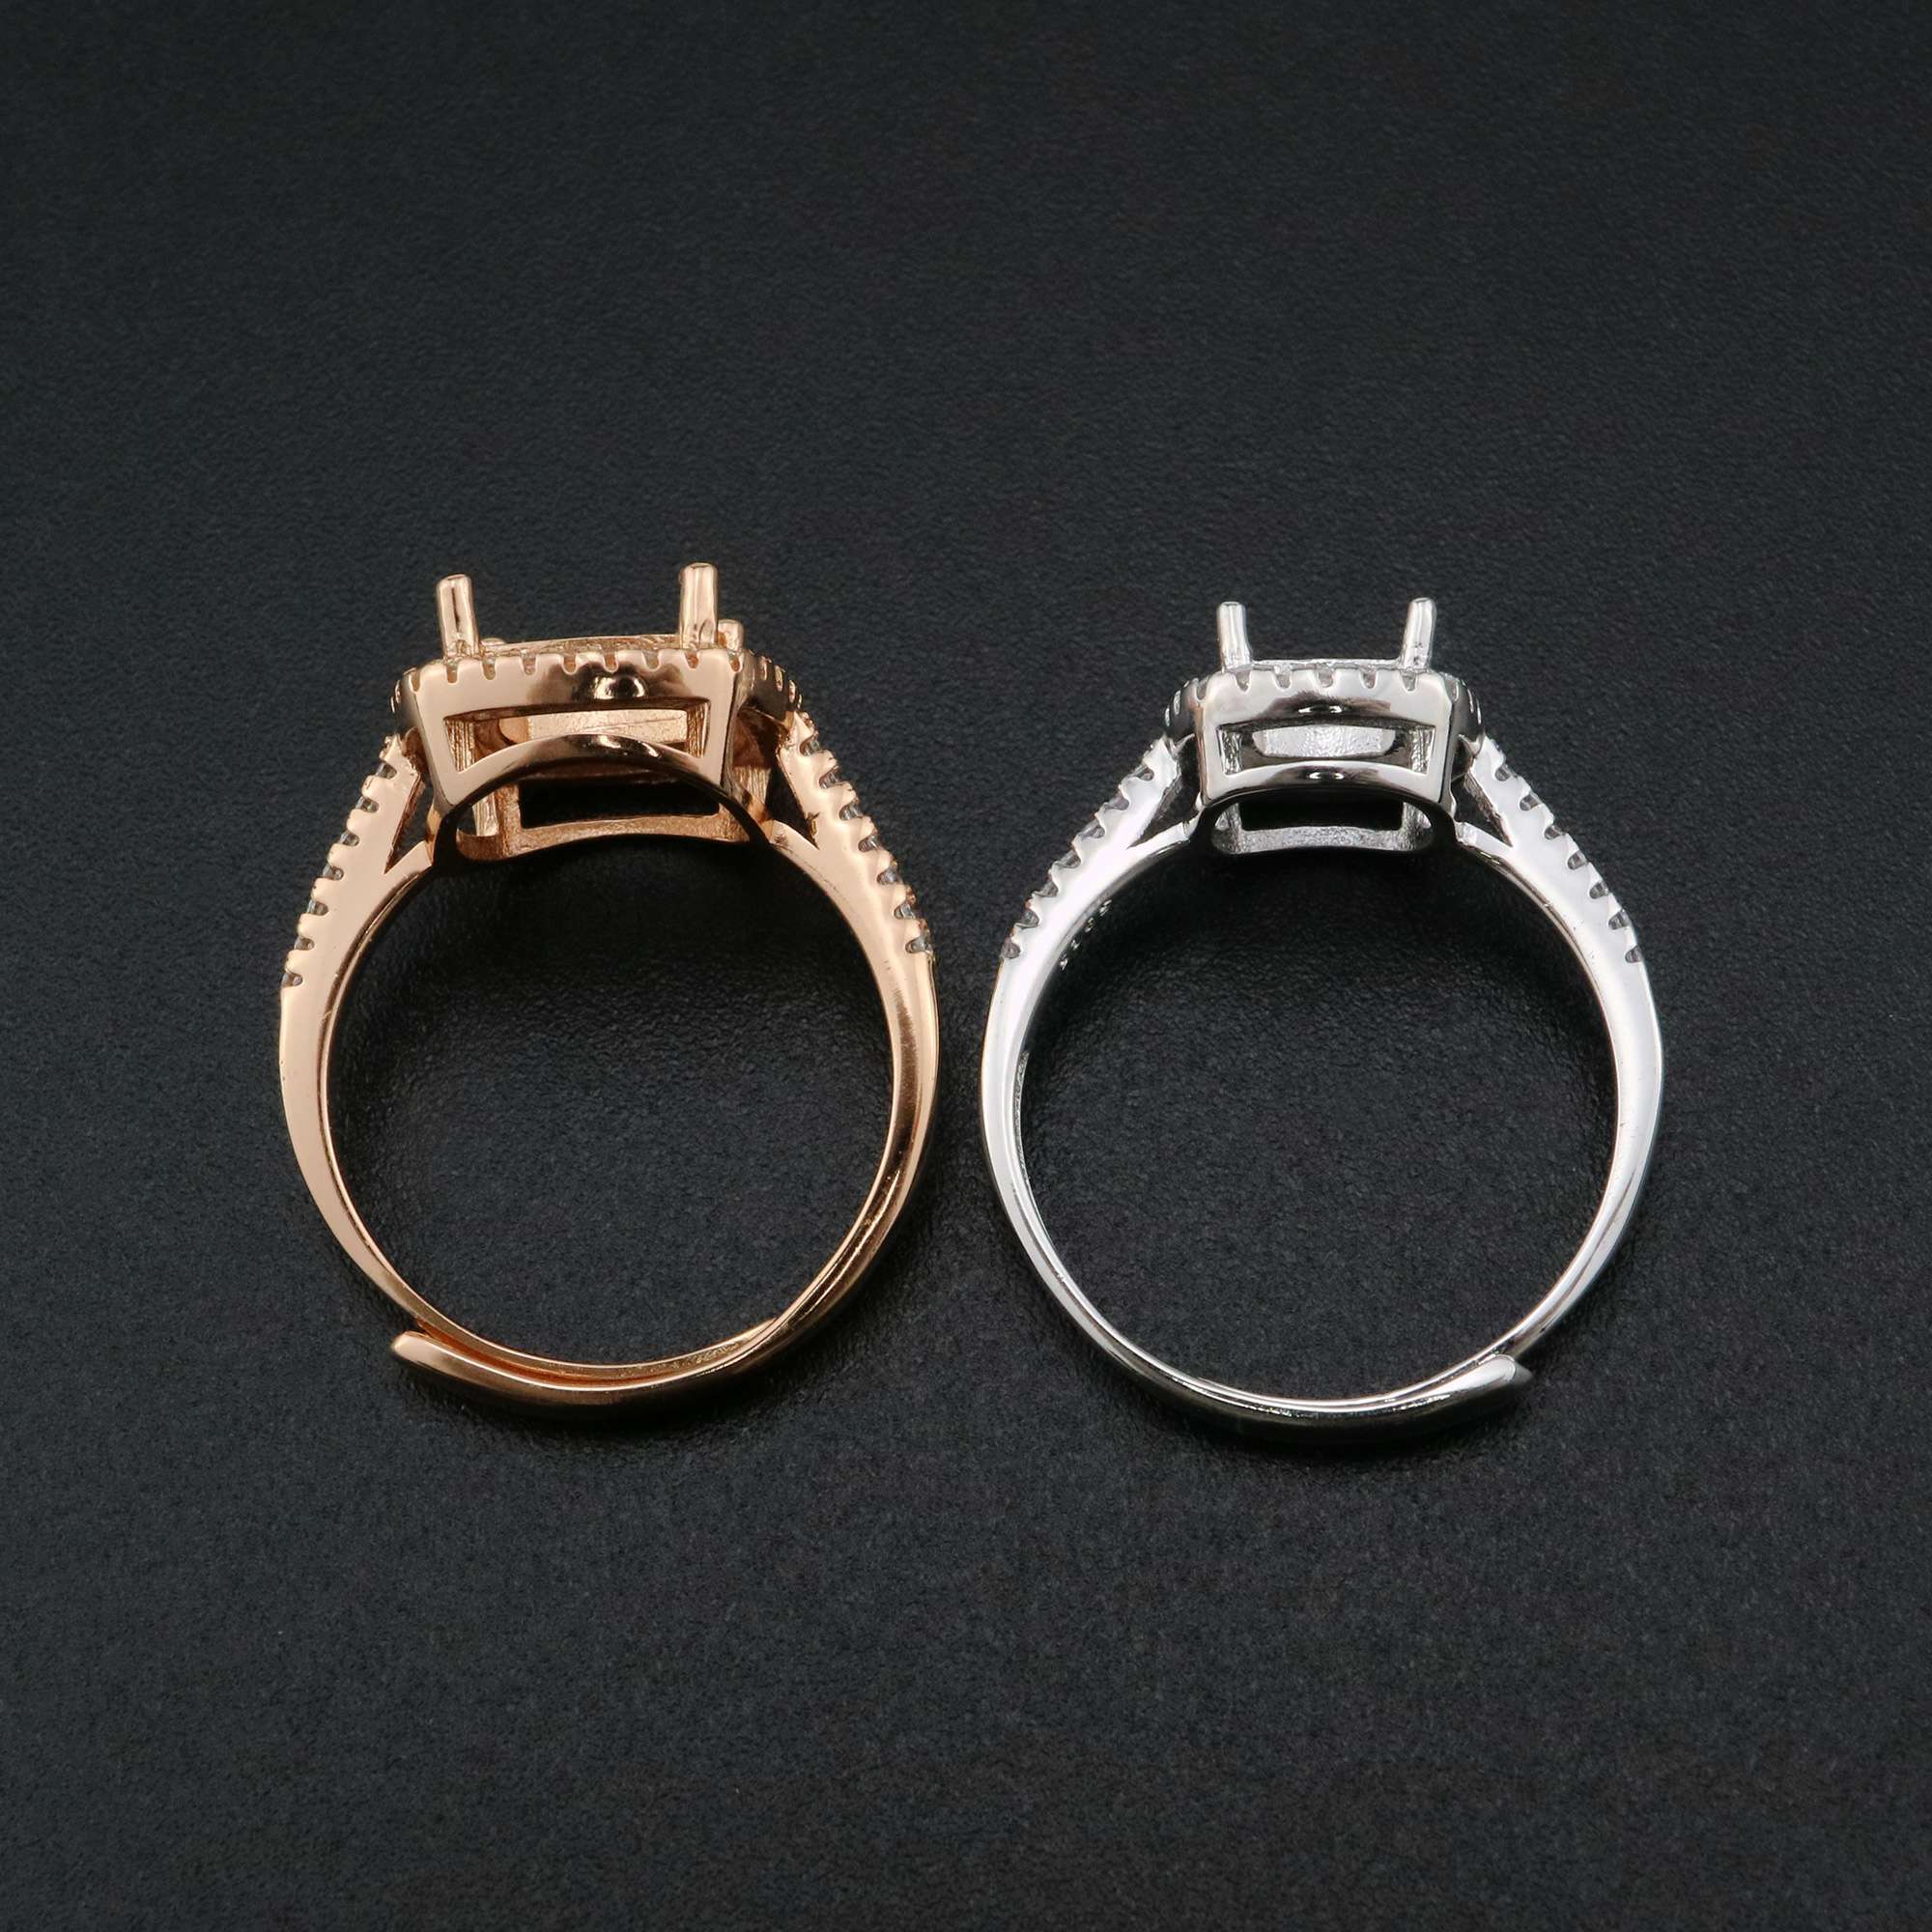 1Pcs 5-8MM Cushion Square Prong Ring Settings Blank Adjustable Halo Rose Gold Plated Solid 925 Sterling Silver DIY Bezel for Gemstone 1294189 - Click Image to Close